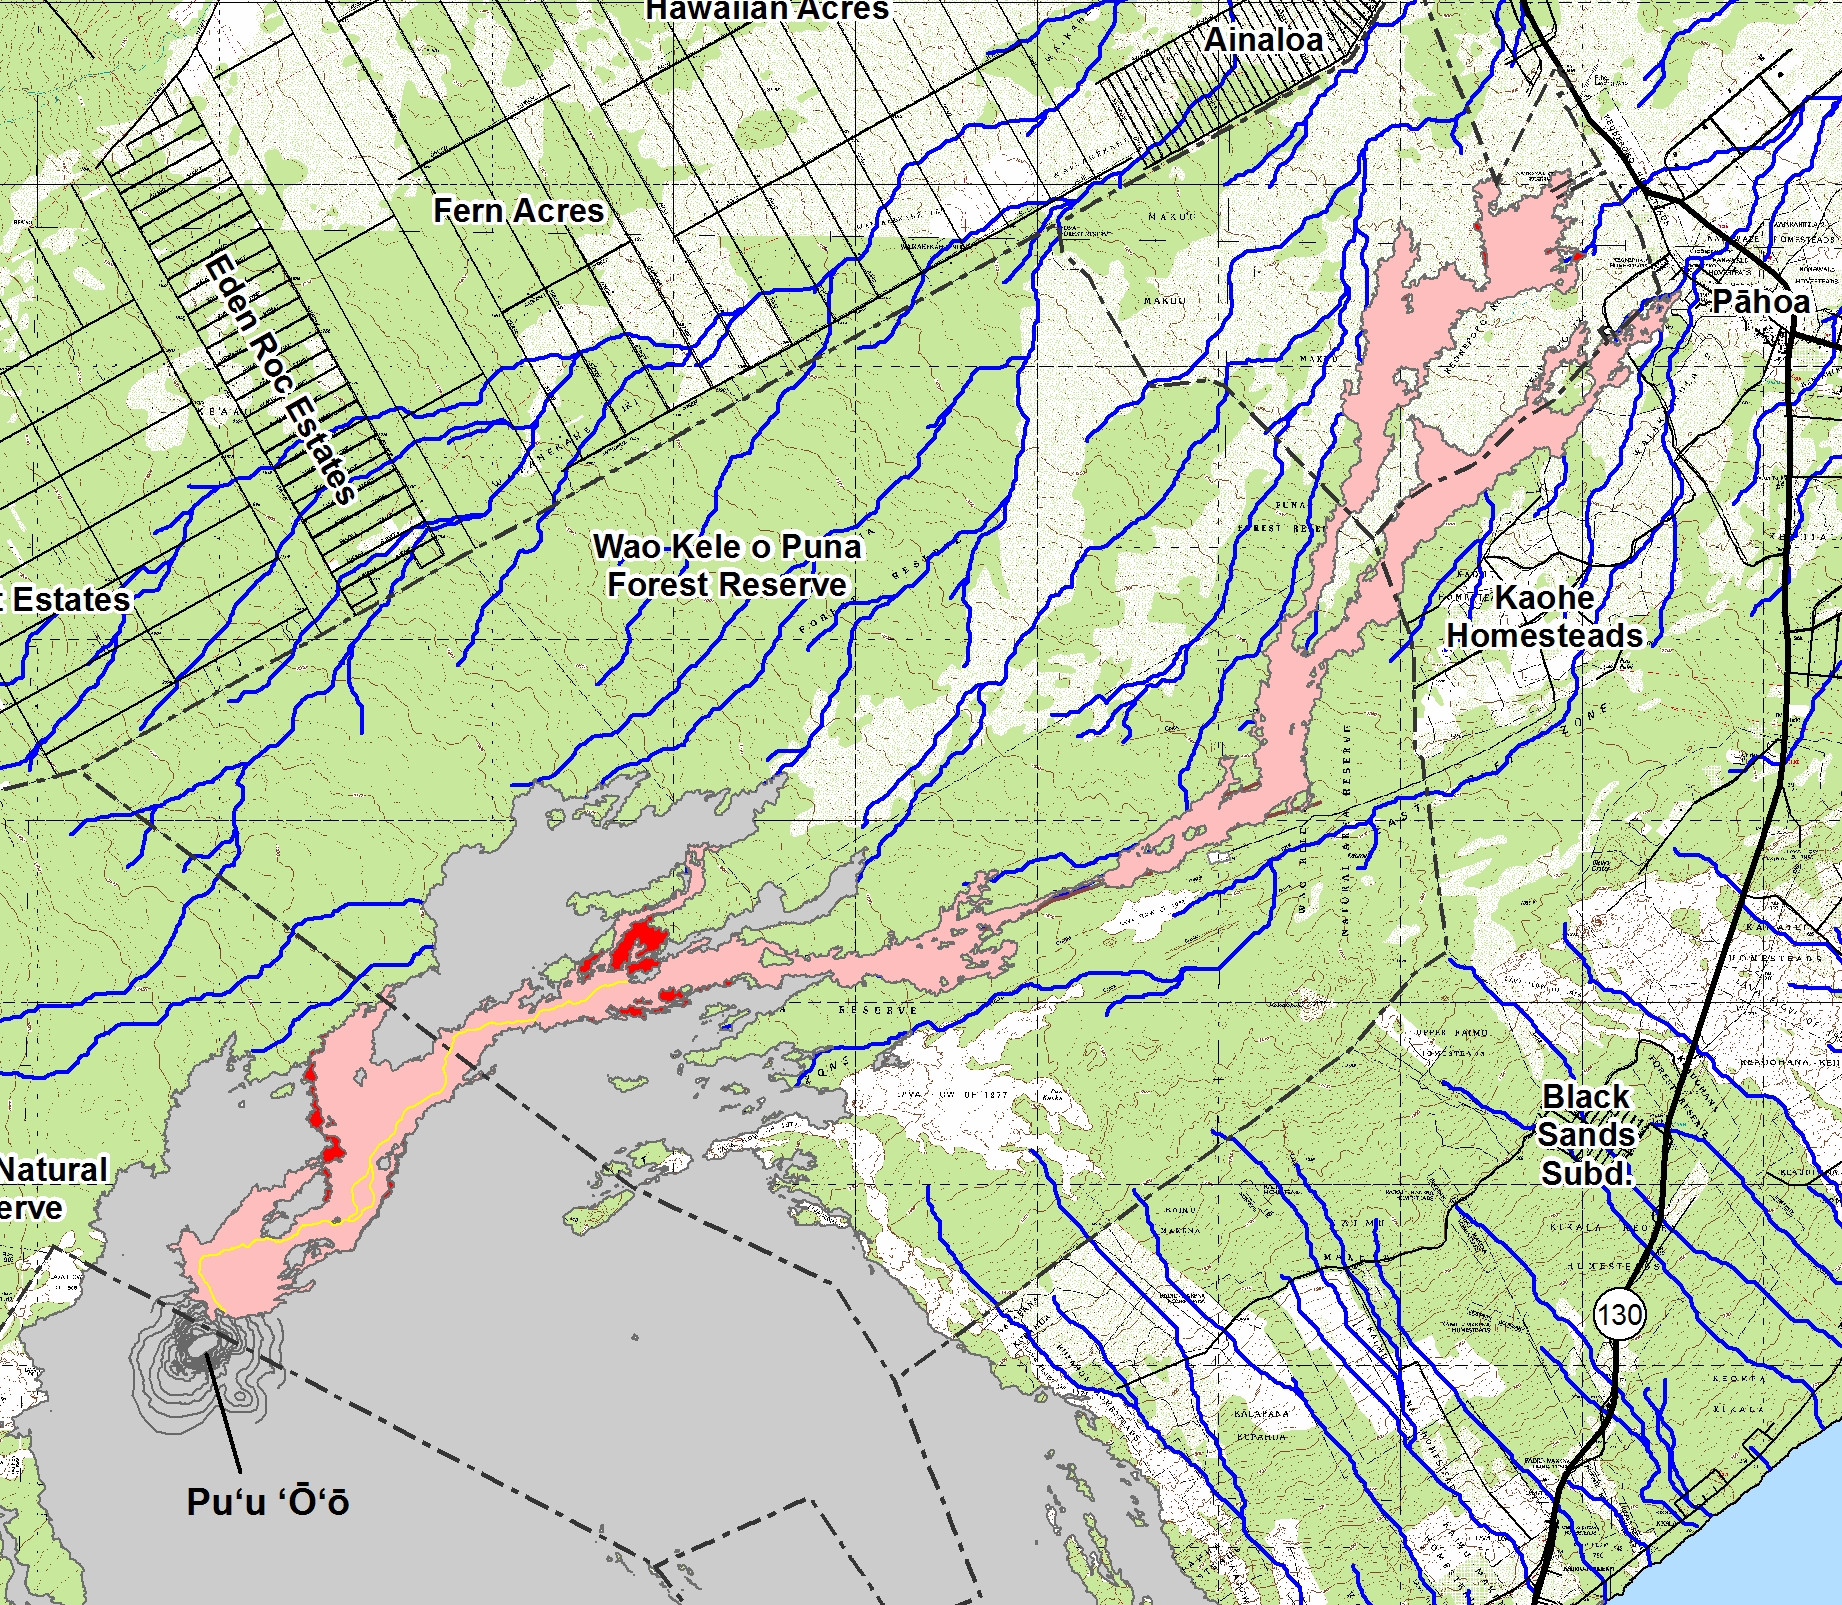 April 1, 2015: Closer view of the USGS map showing flow field changes.